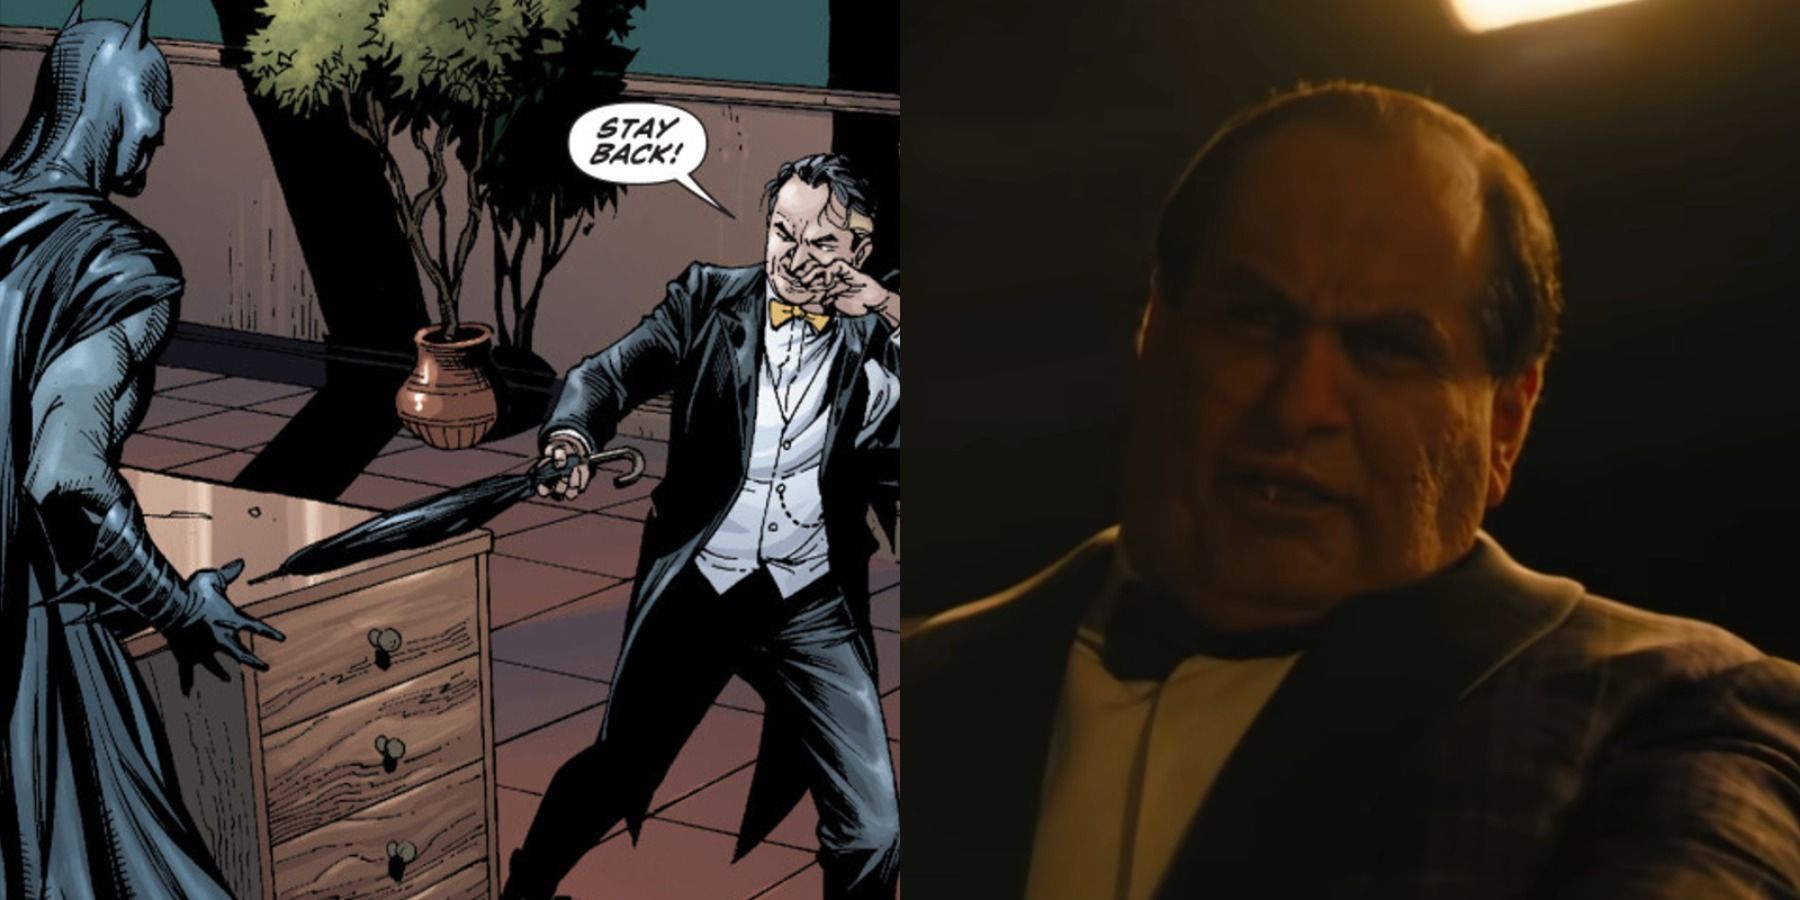 Split image of Batman confronting Oswald Cobblepott in Batman Earth One and The Penguin in a club in The Batman 2022